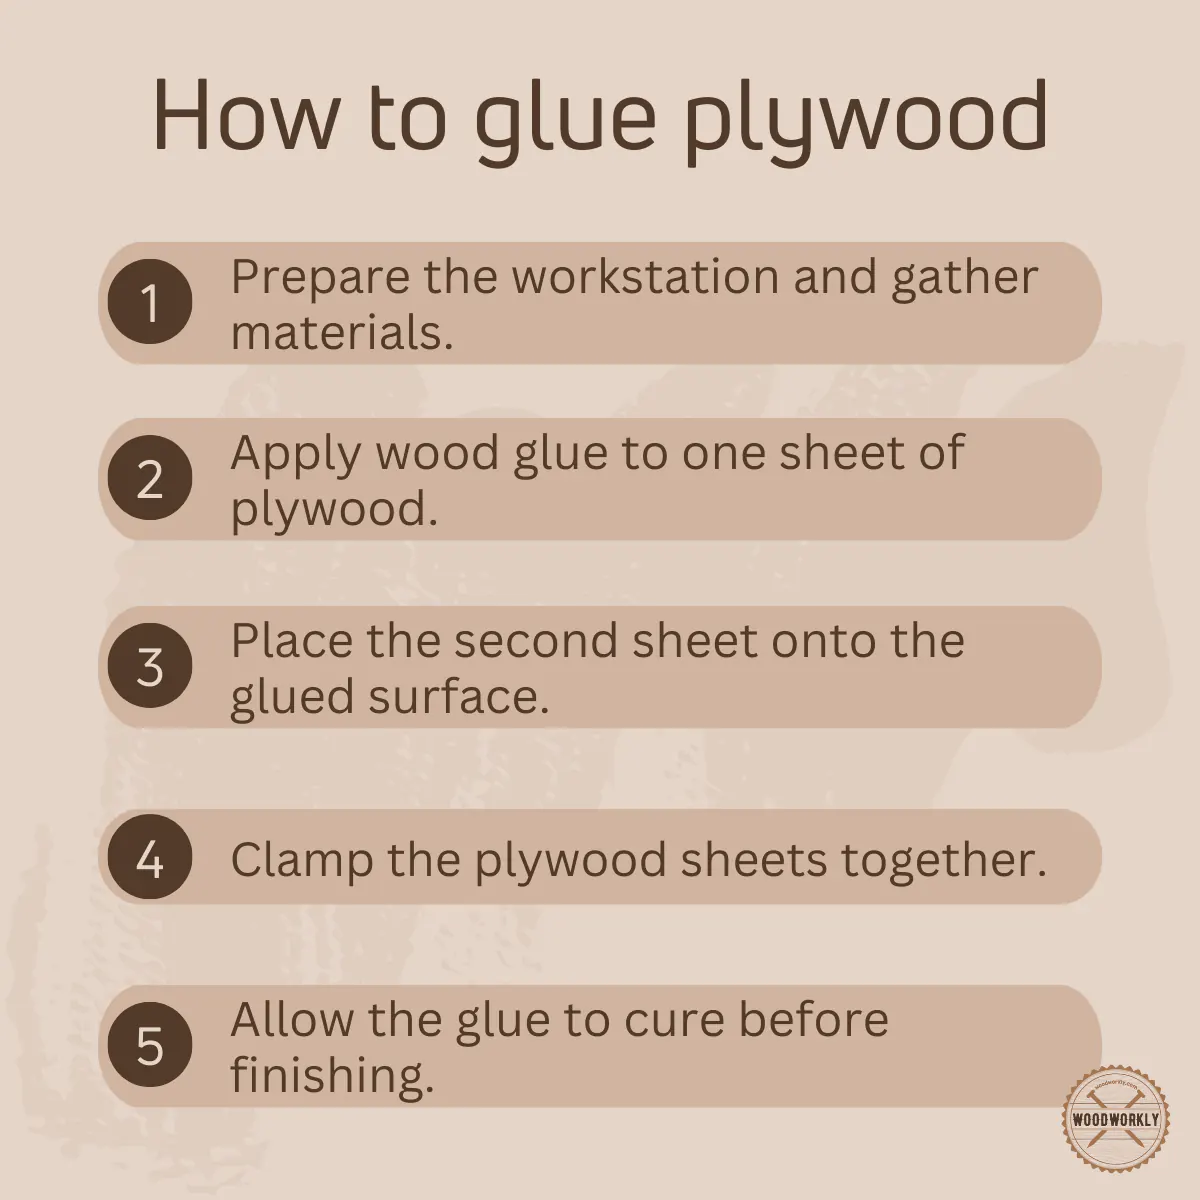 How to glue plywood